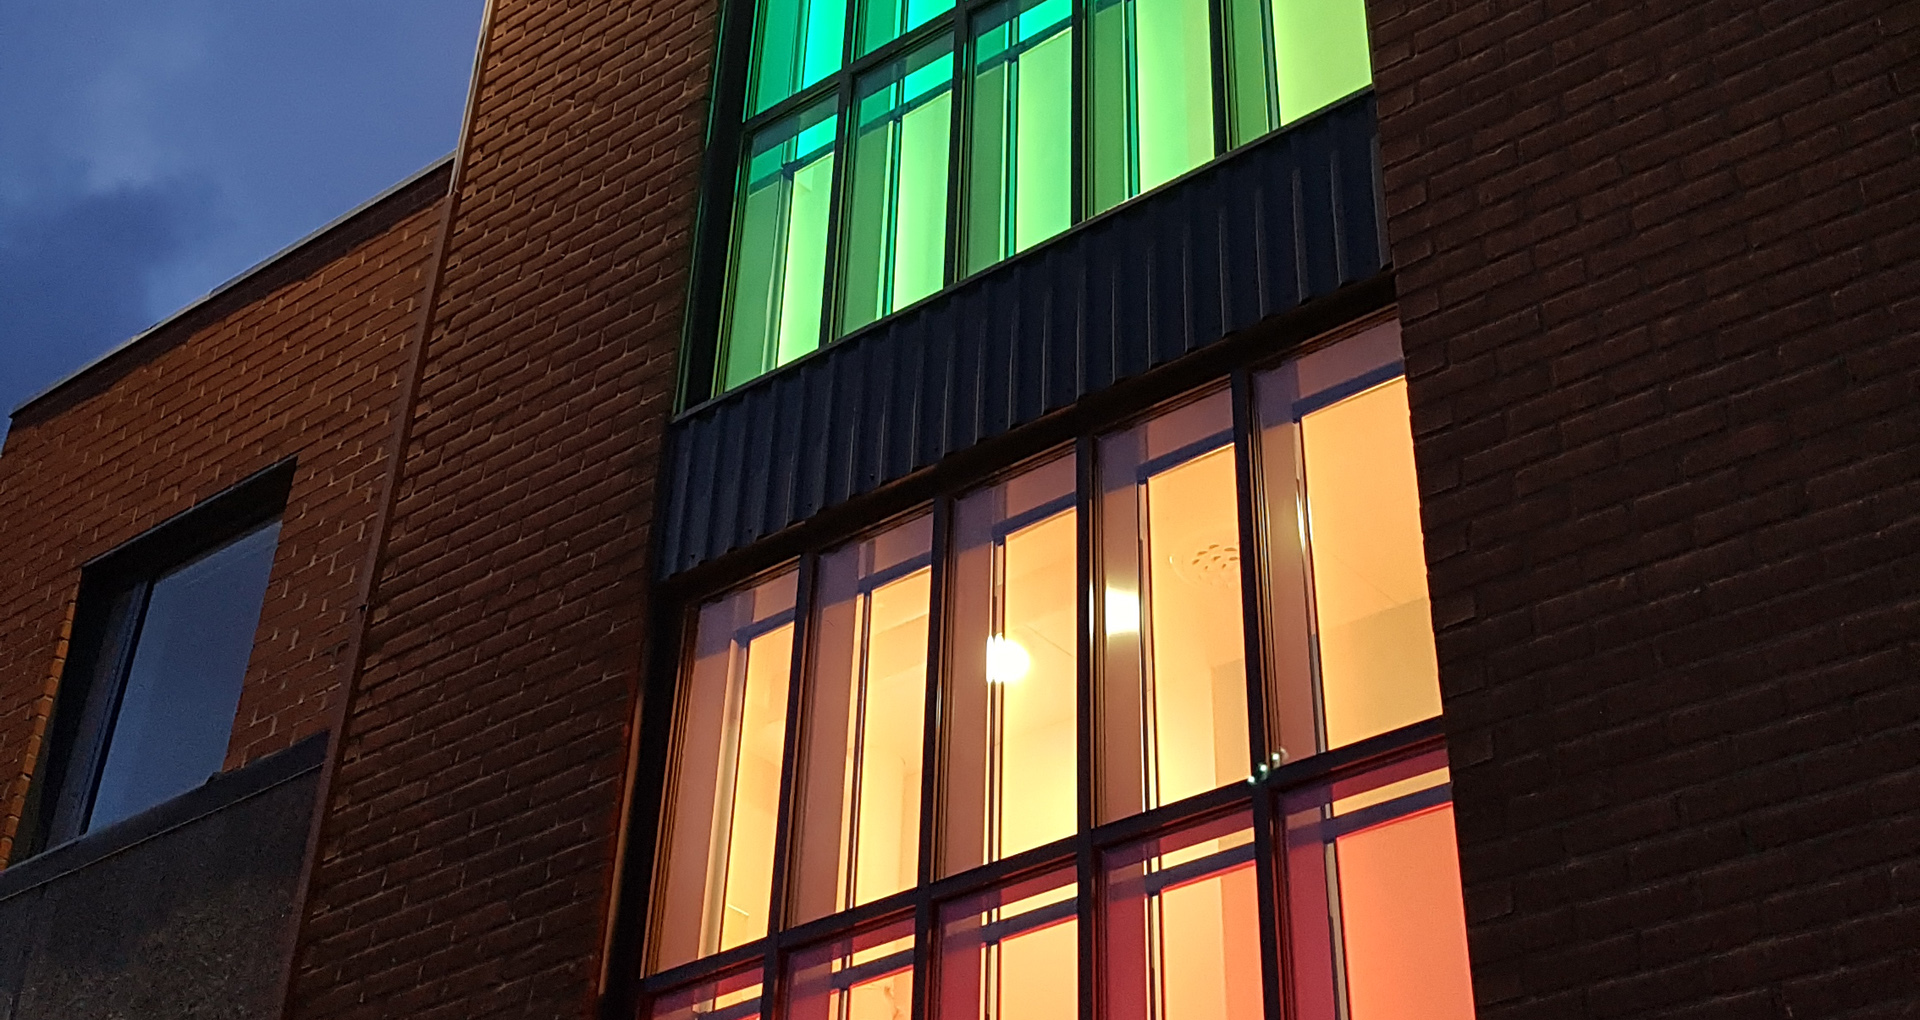 AICCI reference: Light art Thermal Colours, Kuopion Energia’s office building